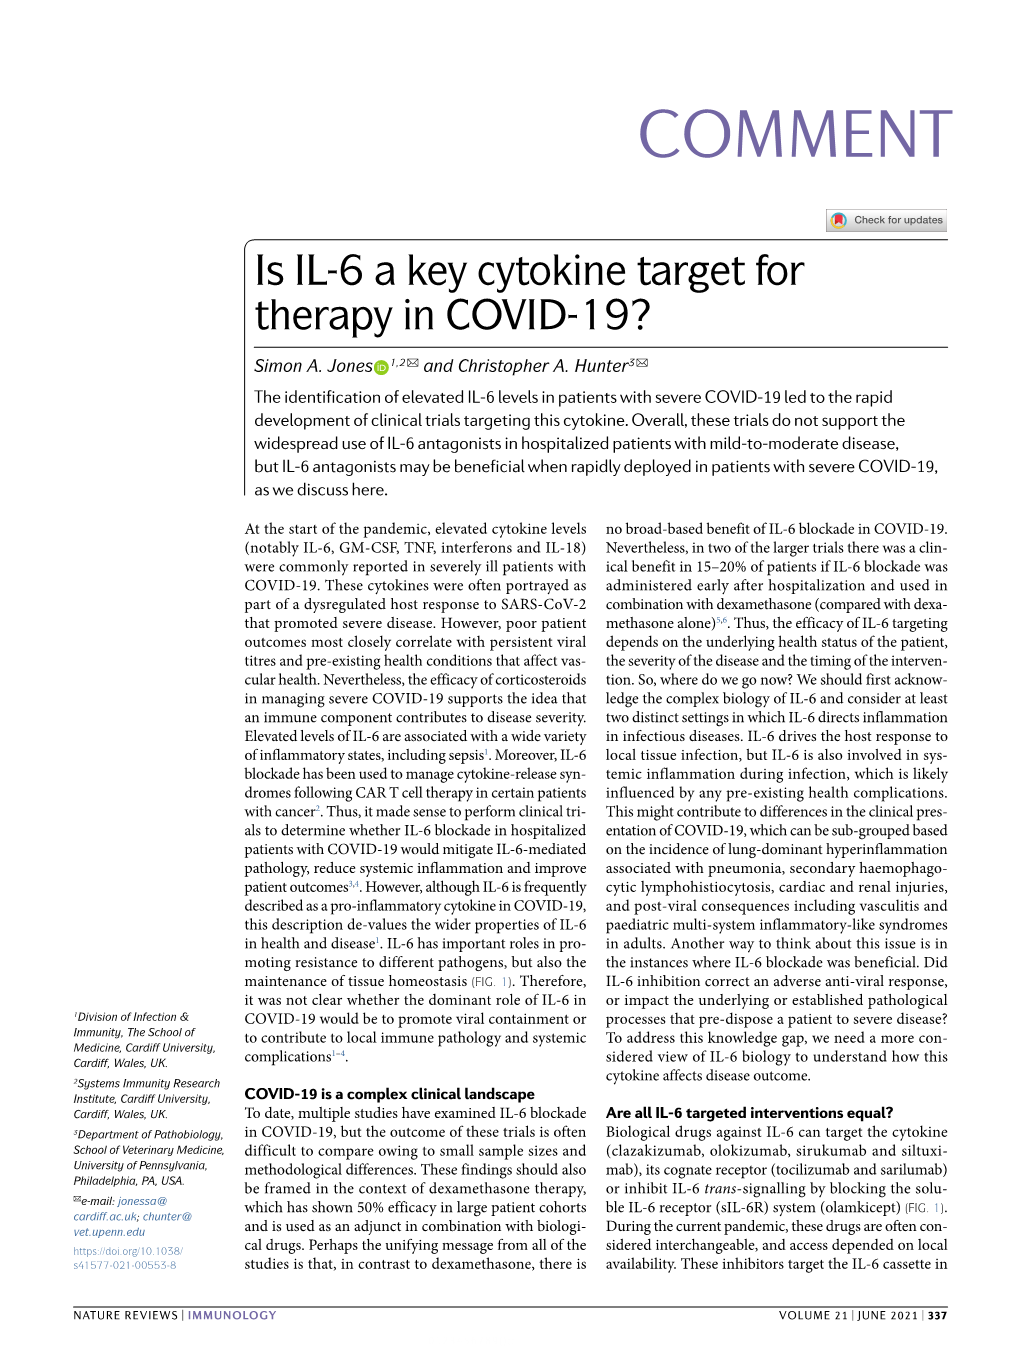 Is IL-6 a Key Cytokine Target for Therapy in COVID-19?